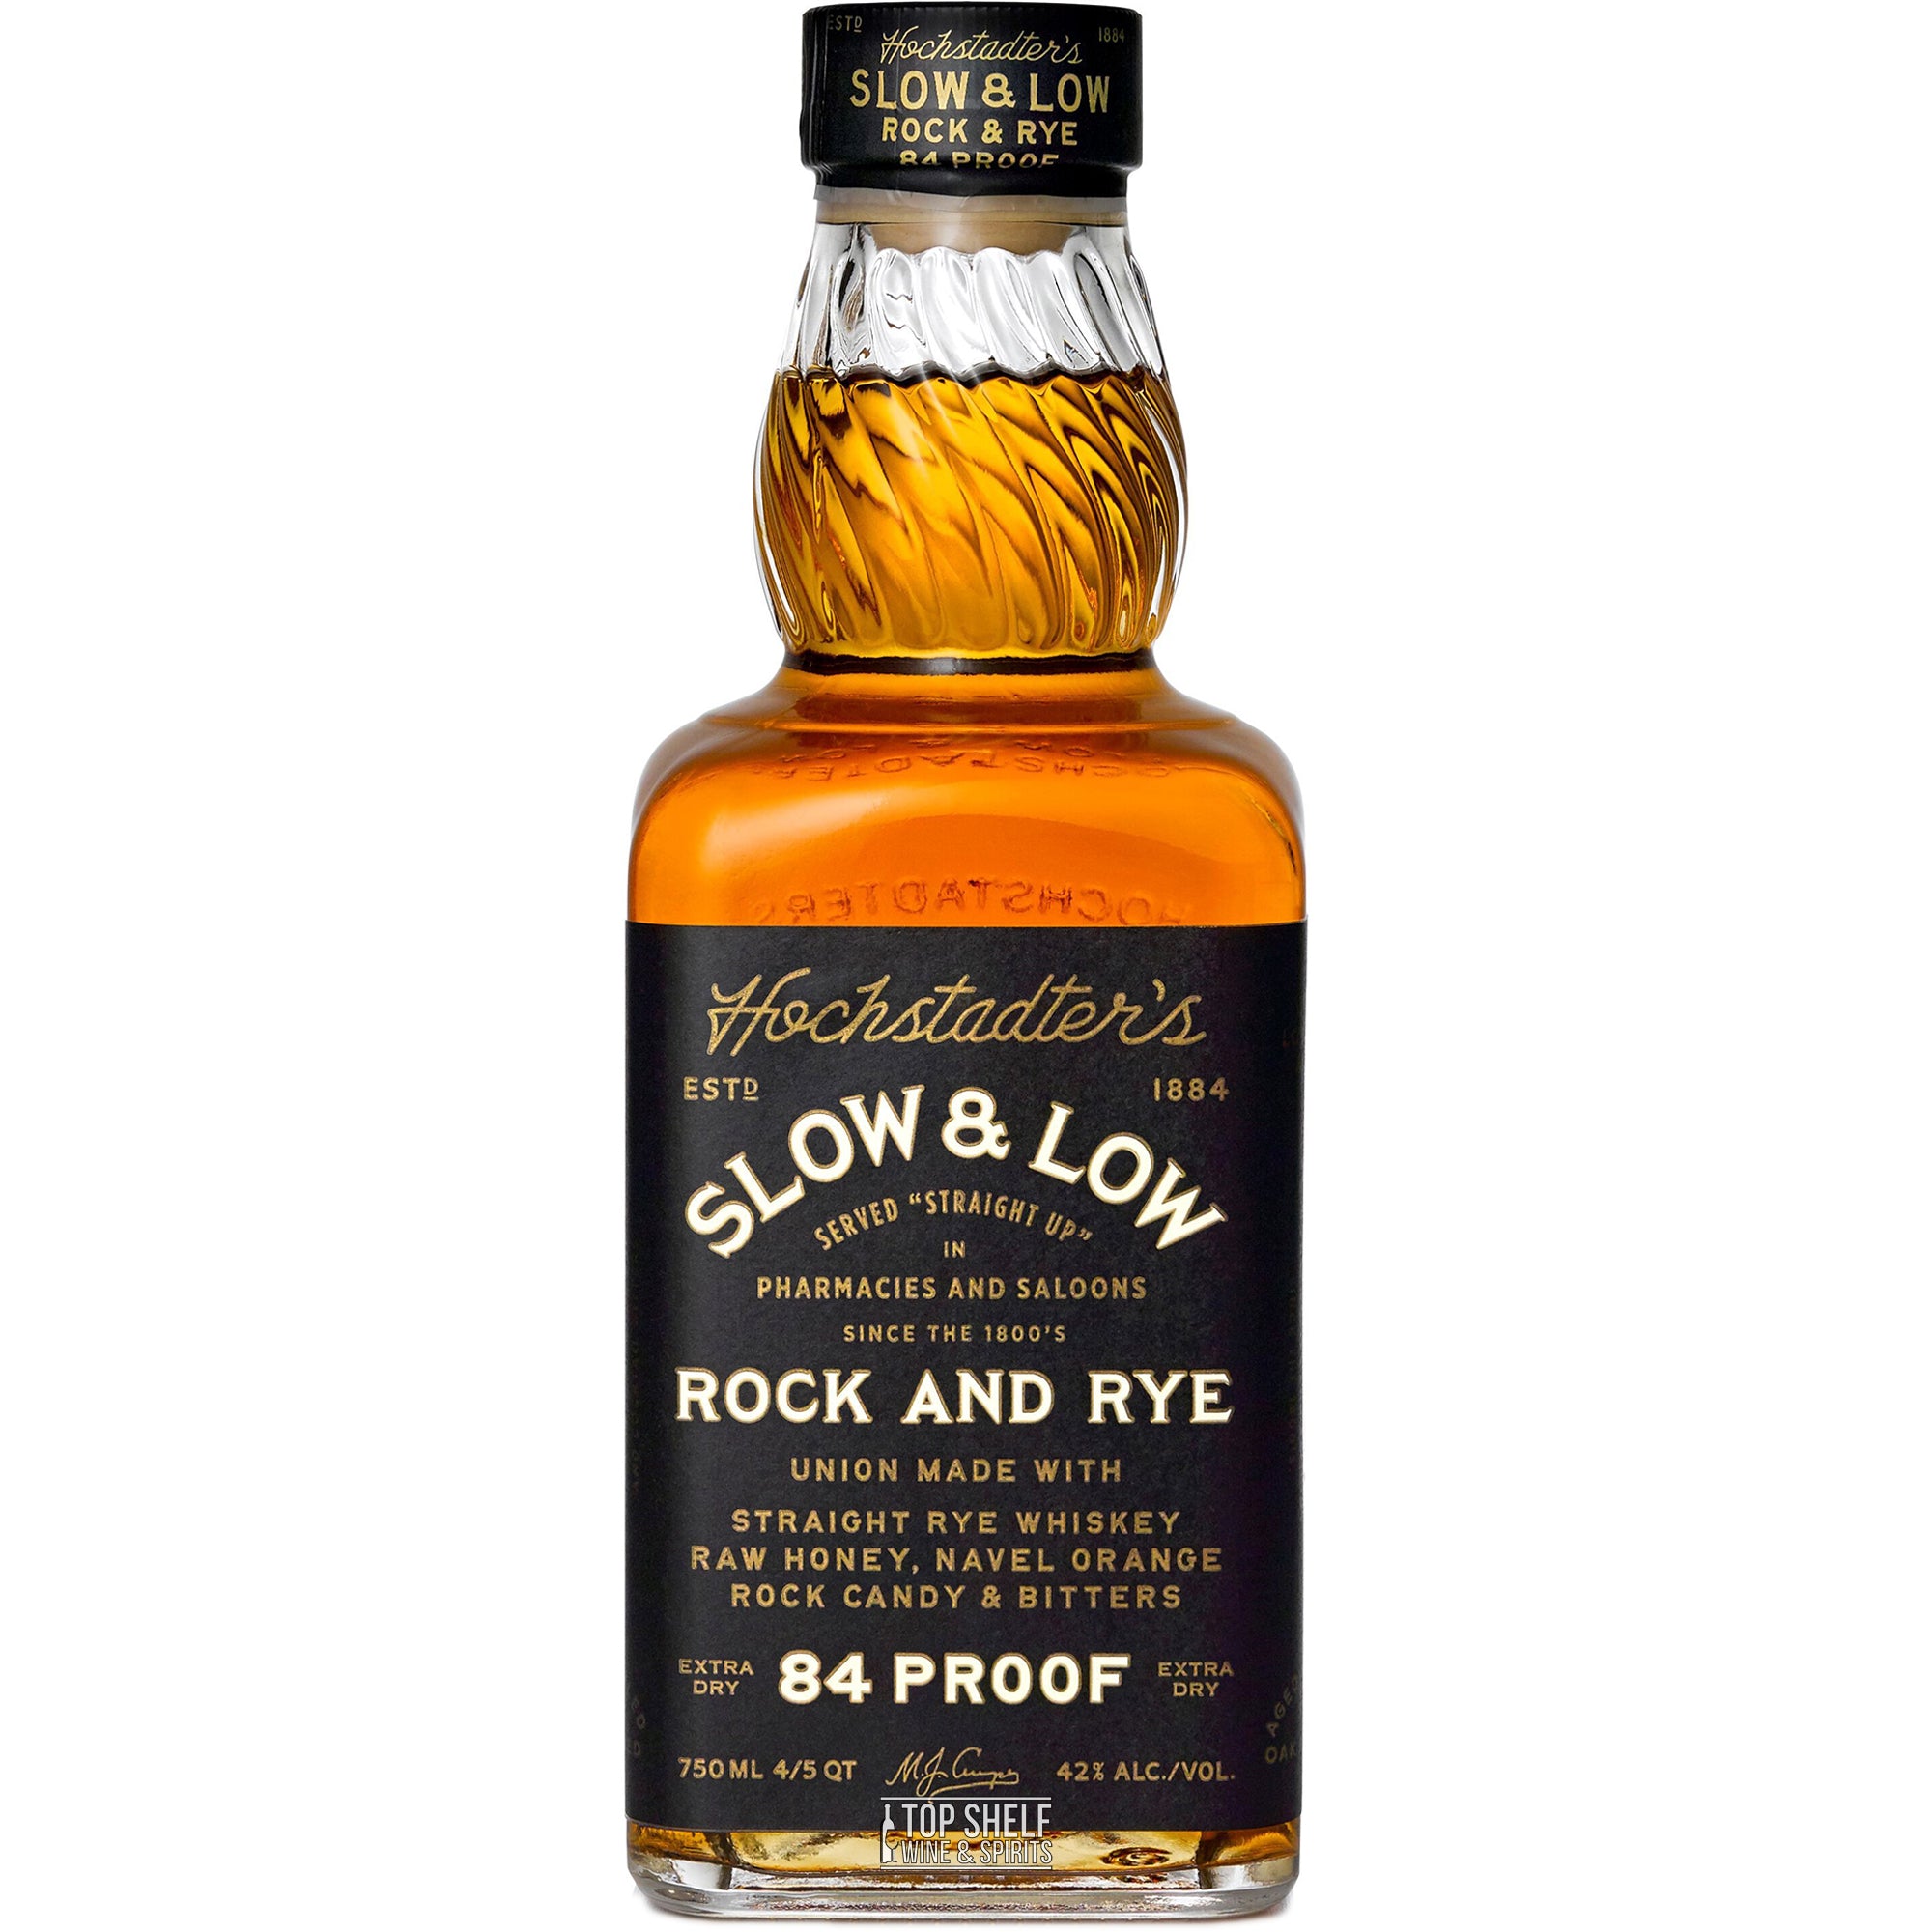 Hochstadter's Slow & Low Rock and Rye 84 Proof Whiskey